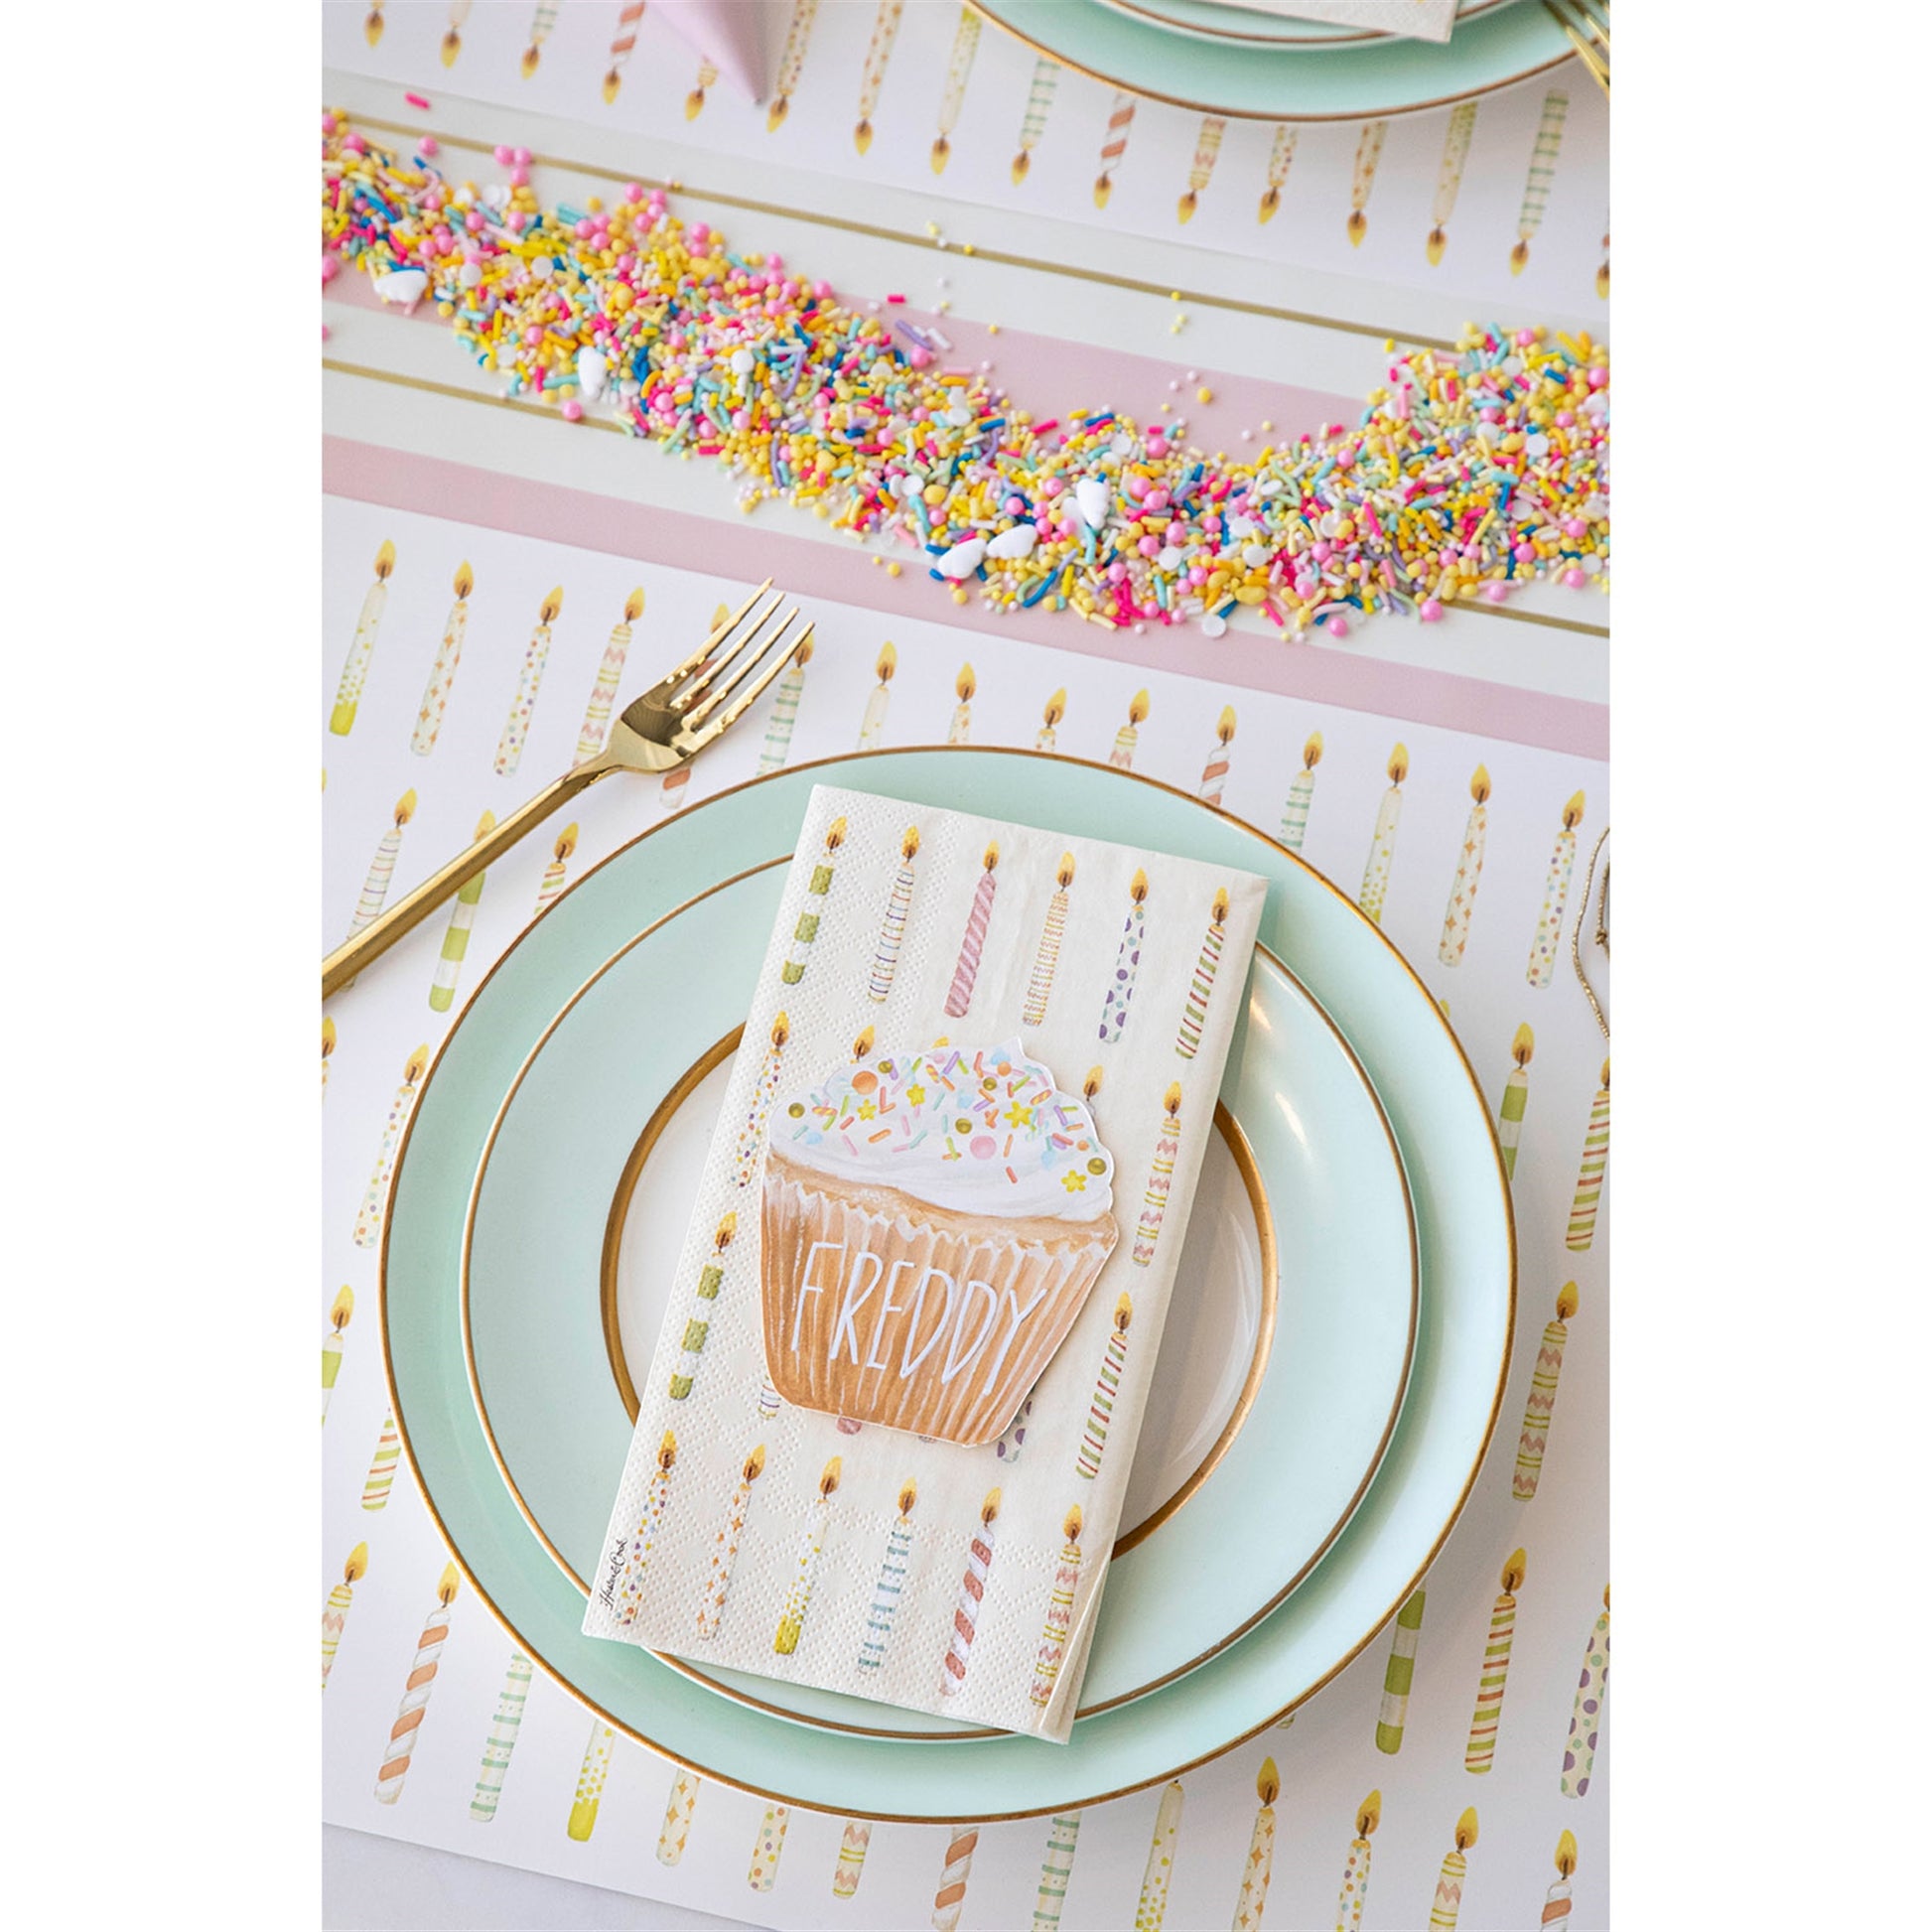 a photo showing how you can set the table using the birthday placemat and the cup cake place card.